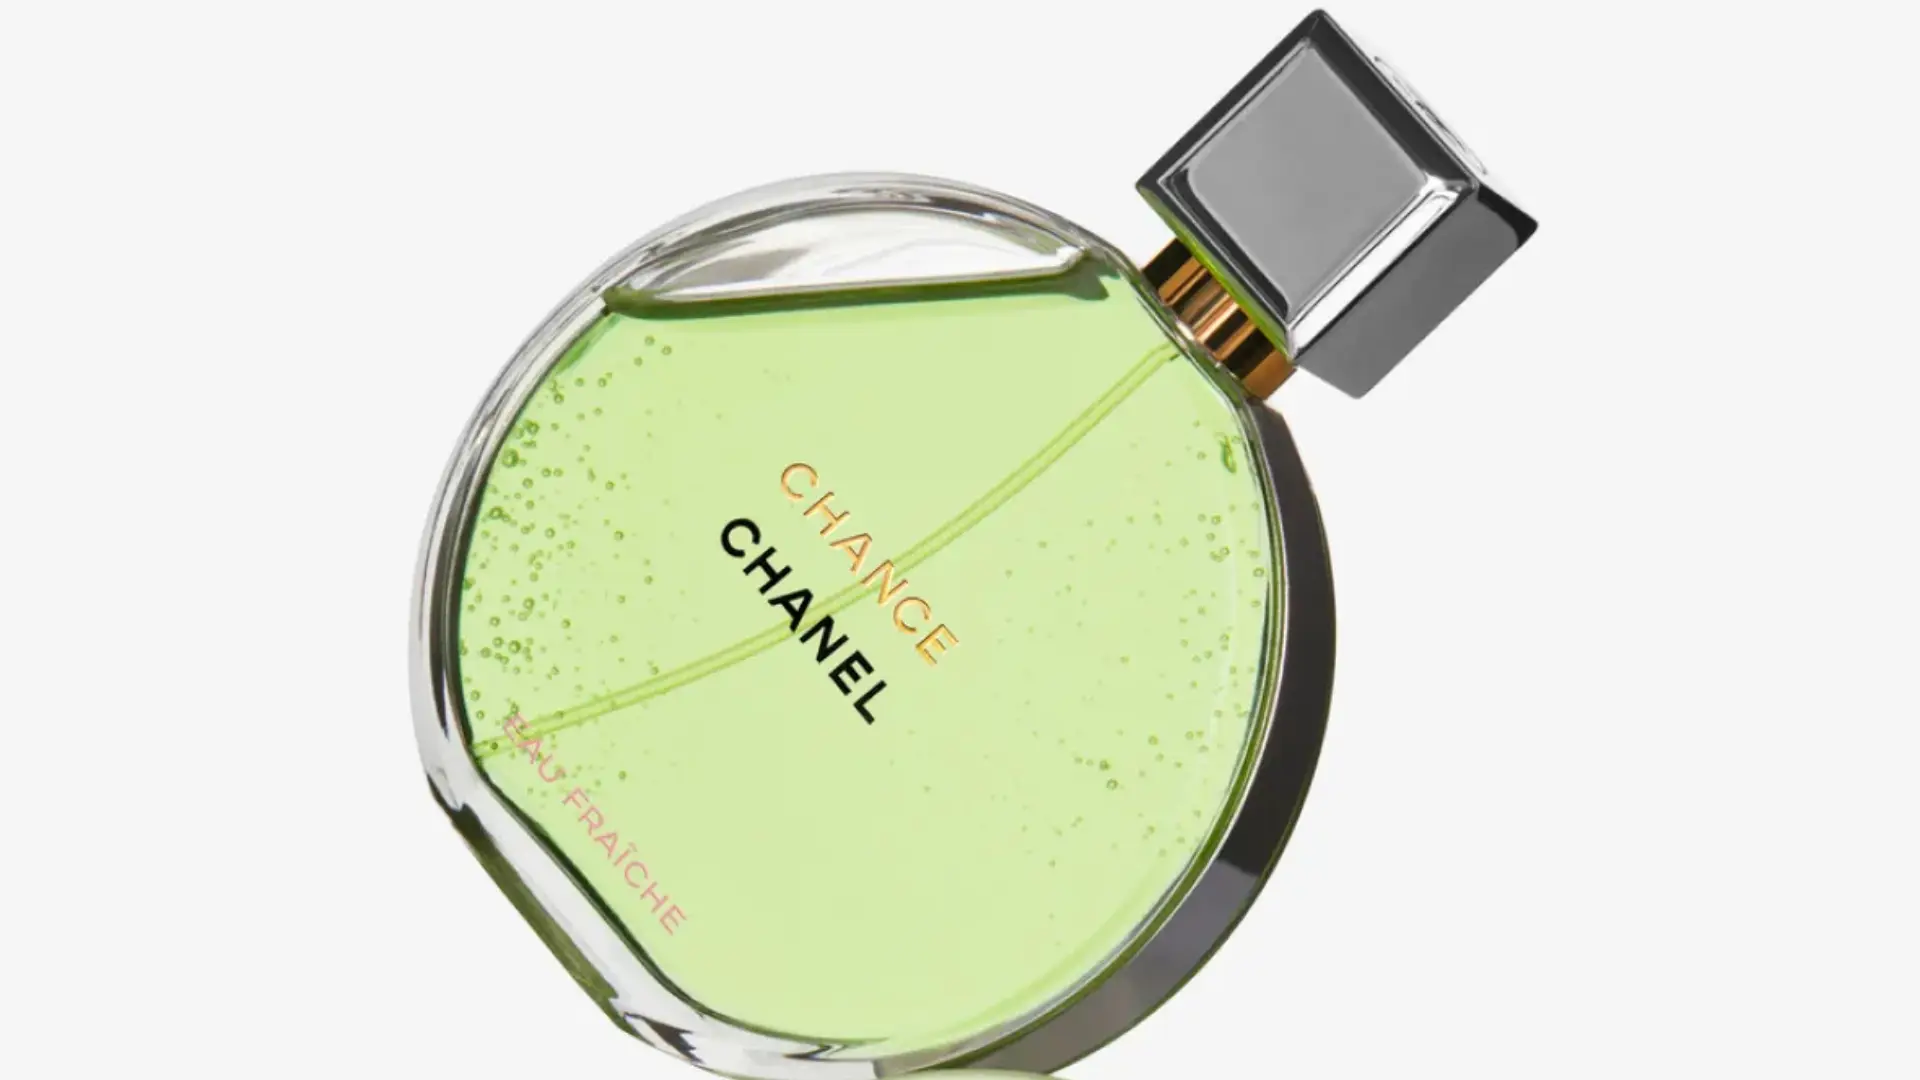 CHANEL LE VERNIS VERDE PASTELLO 590  A SIDE OF GIRLY BITS  Beautygeeks